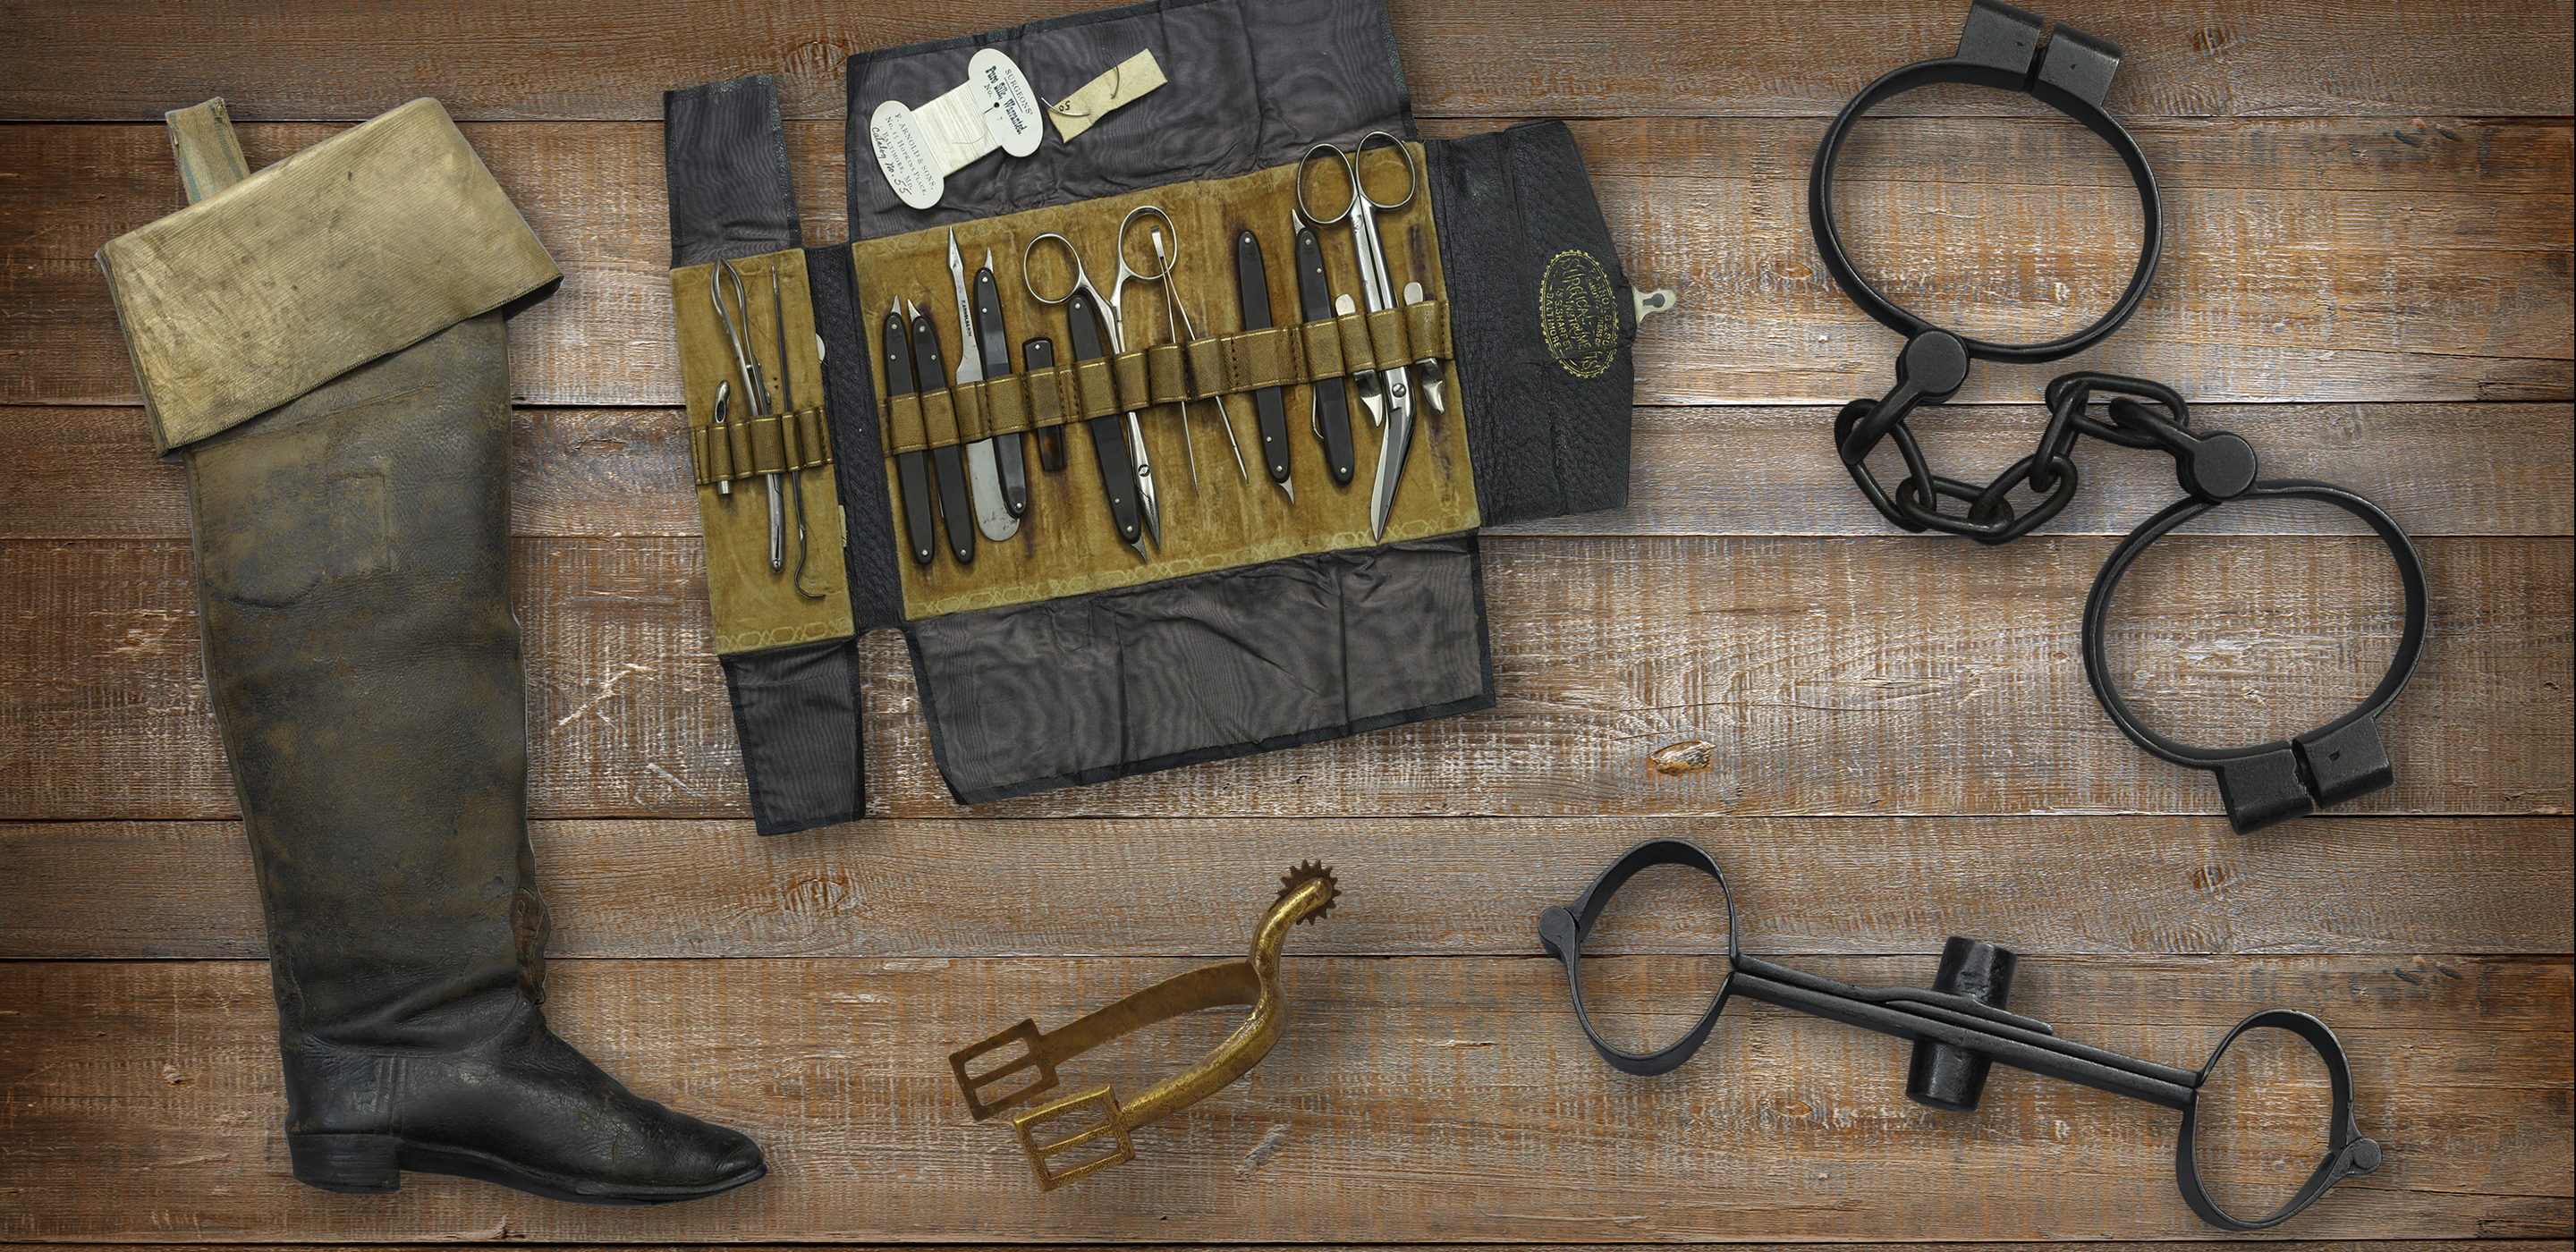 A photograph of a number of items on a wooden tabletop: A boot, a set of surgical instruments, a set of handcuffs, a set of ankle shackles and a spur.